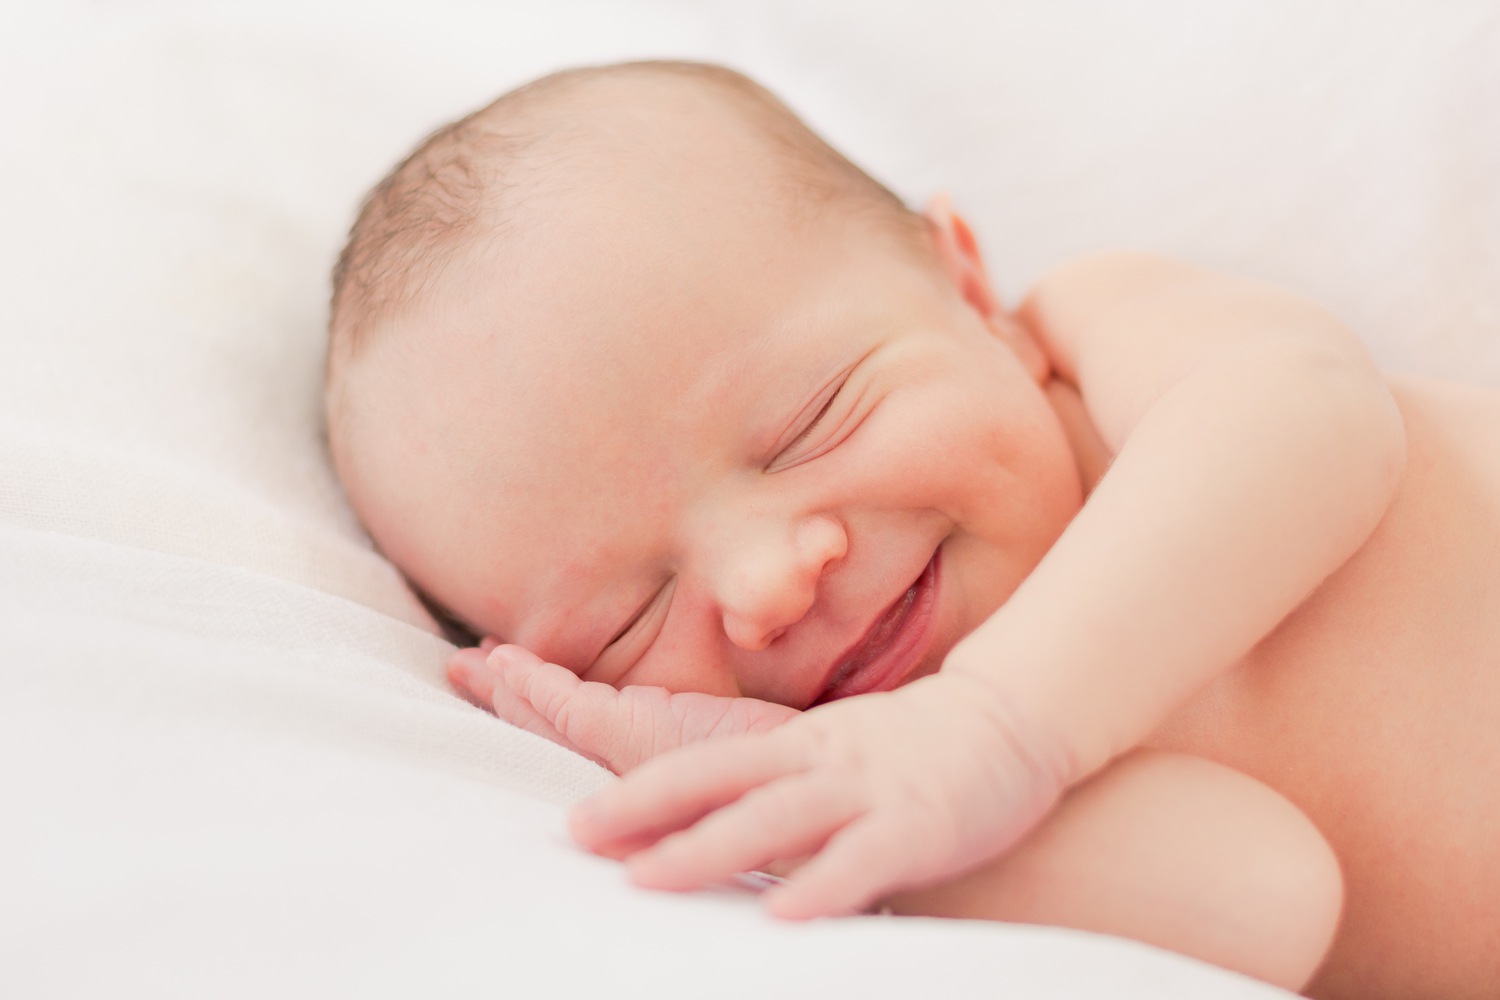 Signs Your Baby is Dreaming